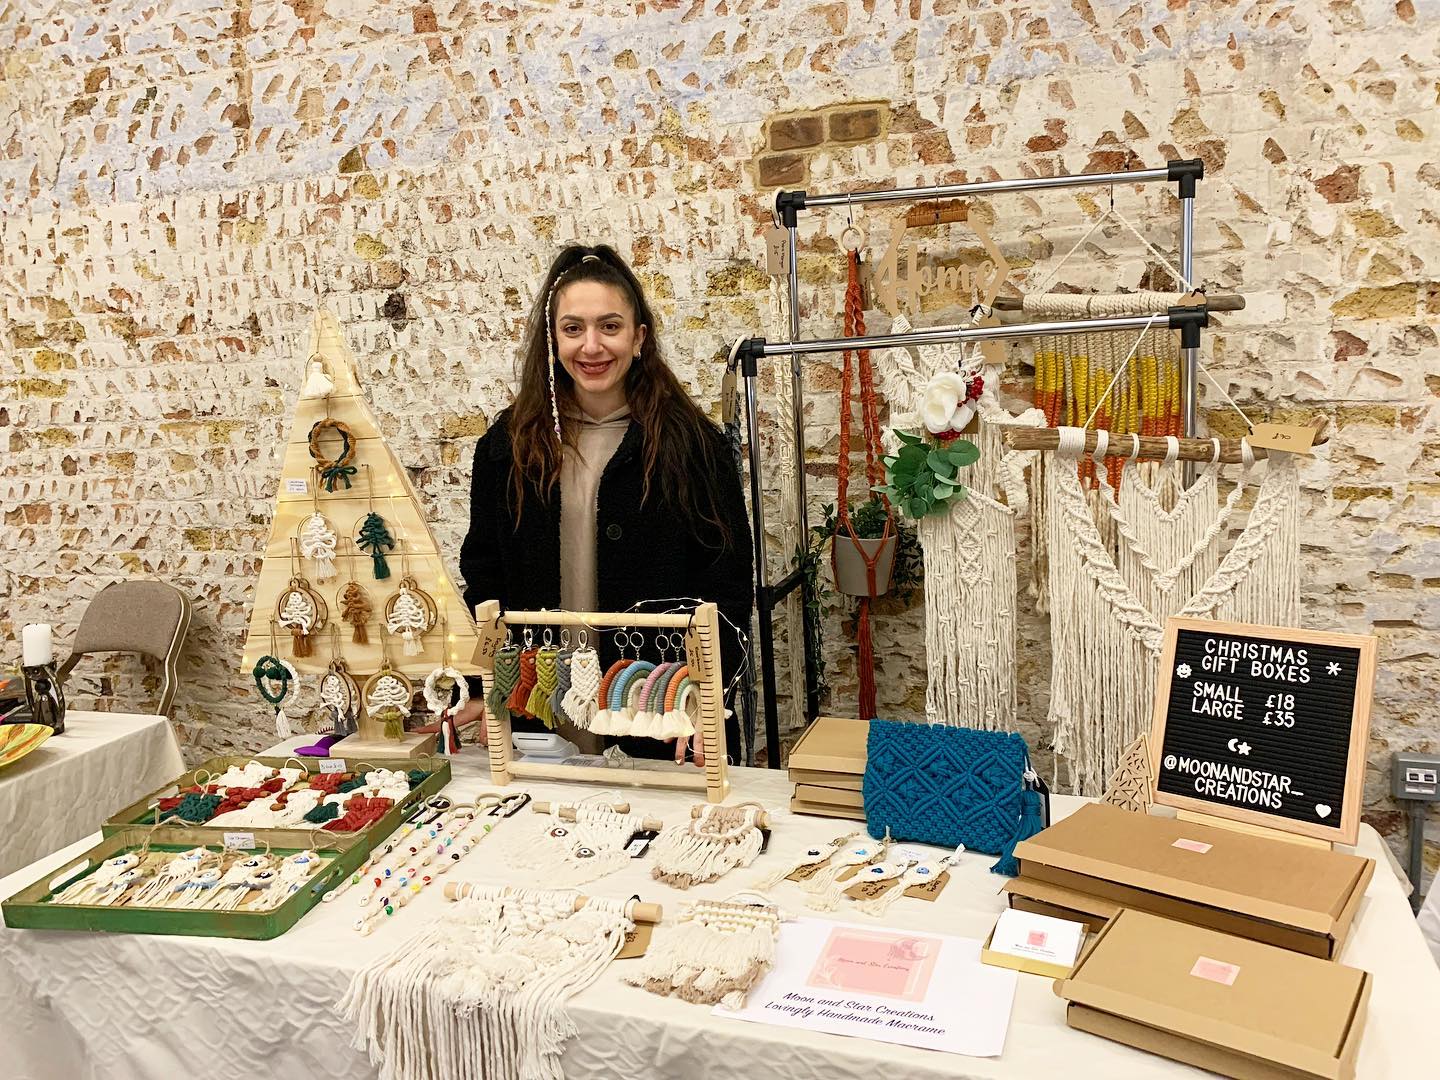 Sanel standing behind a stall of her beautiful macrame products